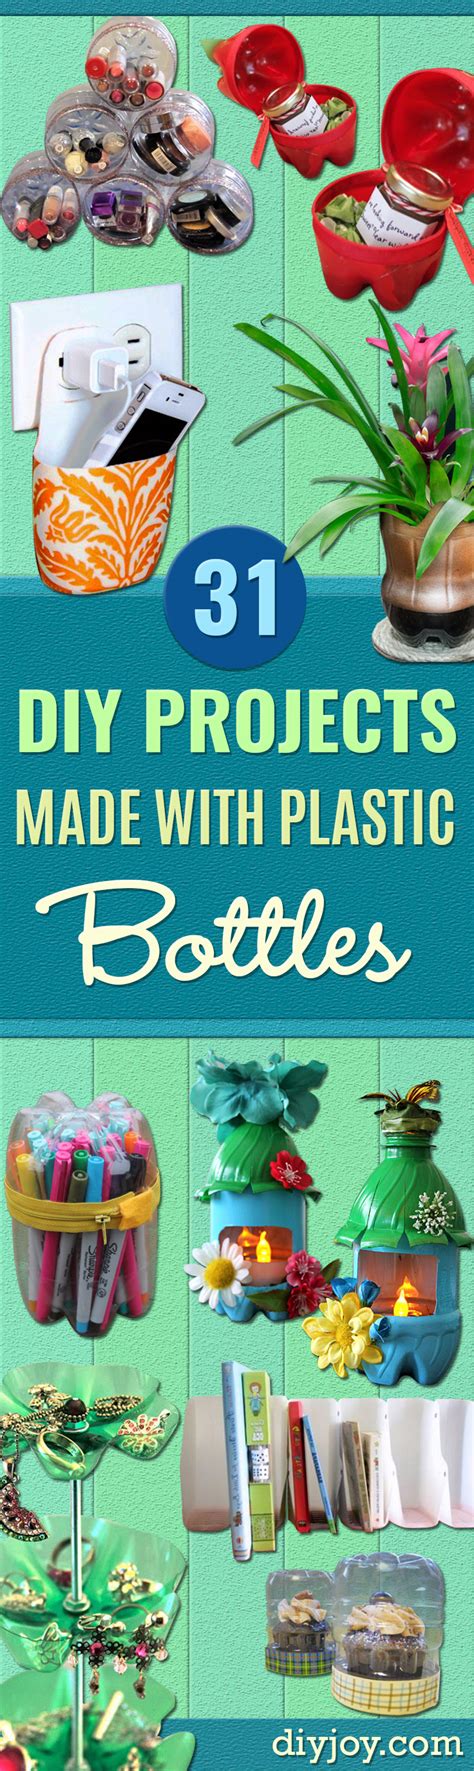 31 Awesome Diy Projects Made With Plastic Bottles